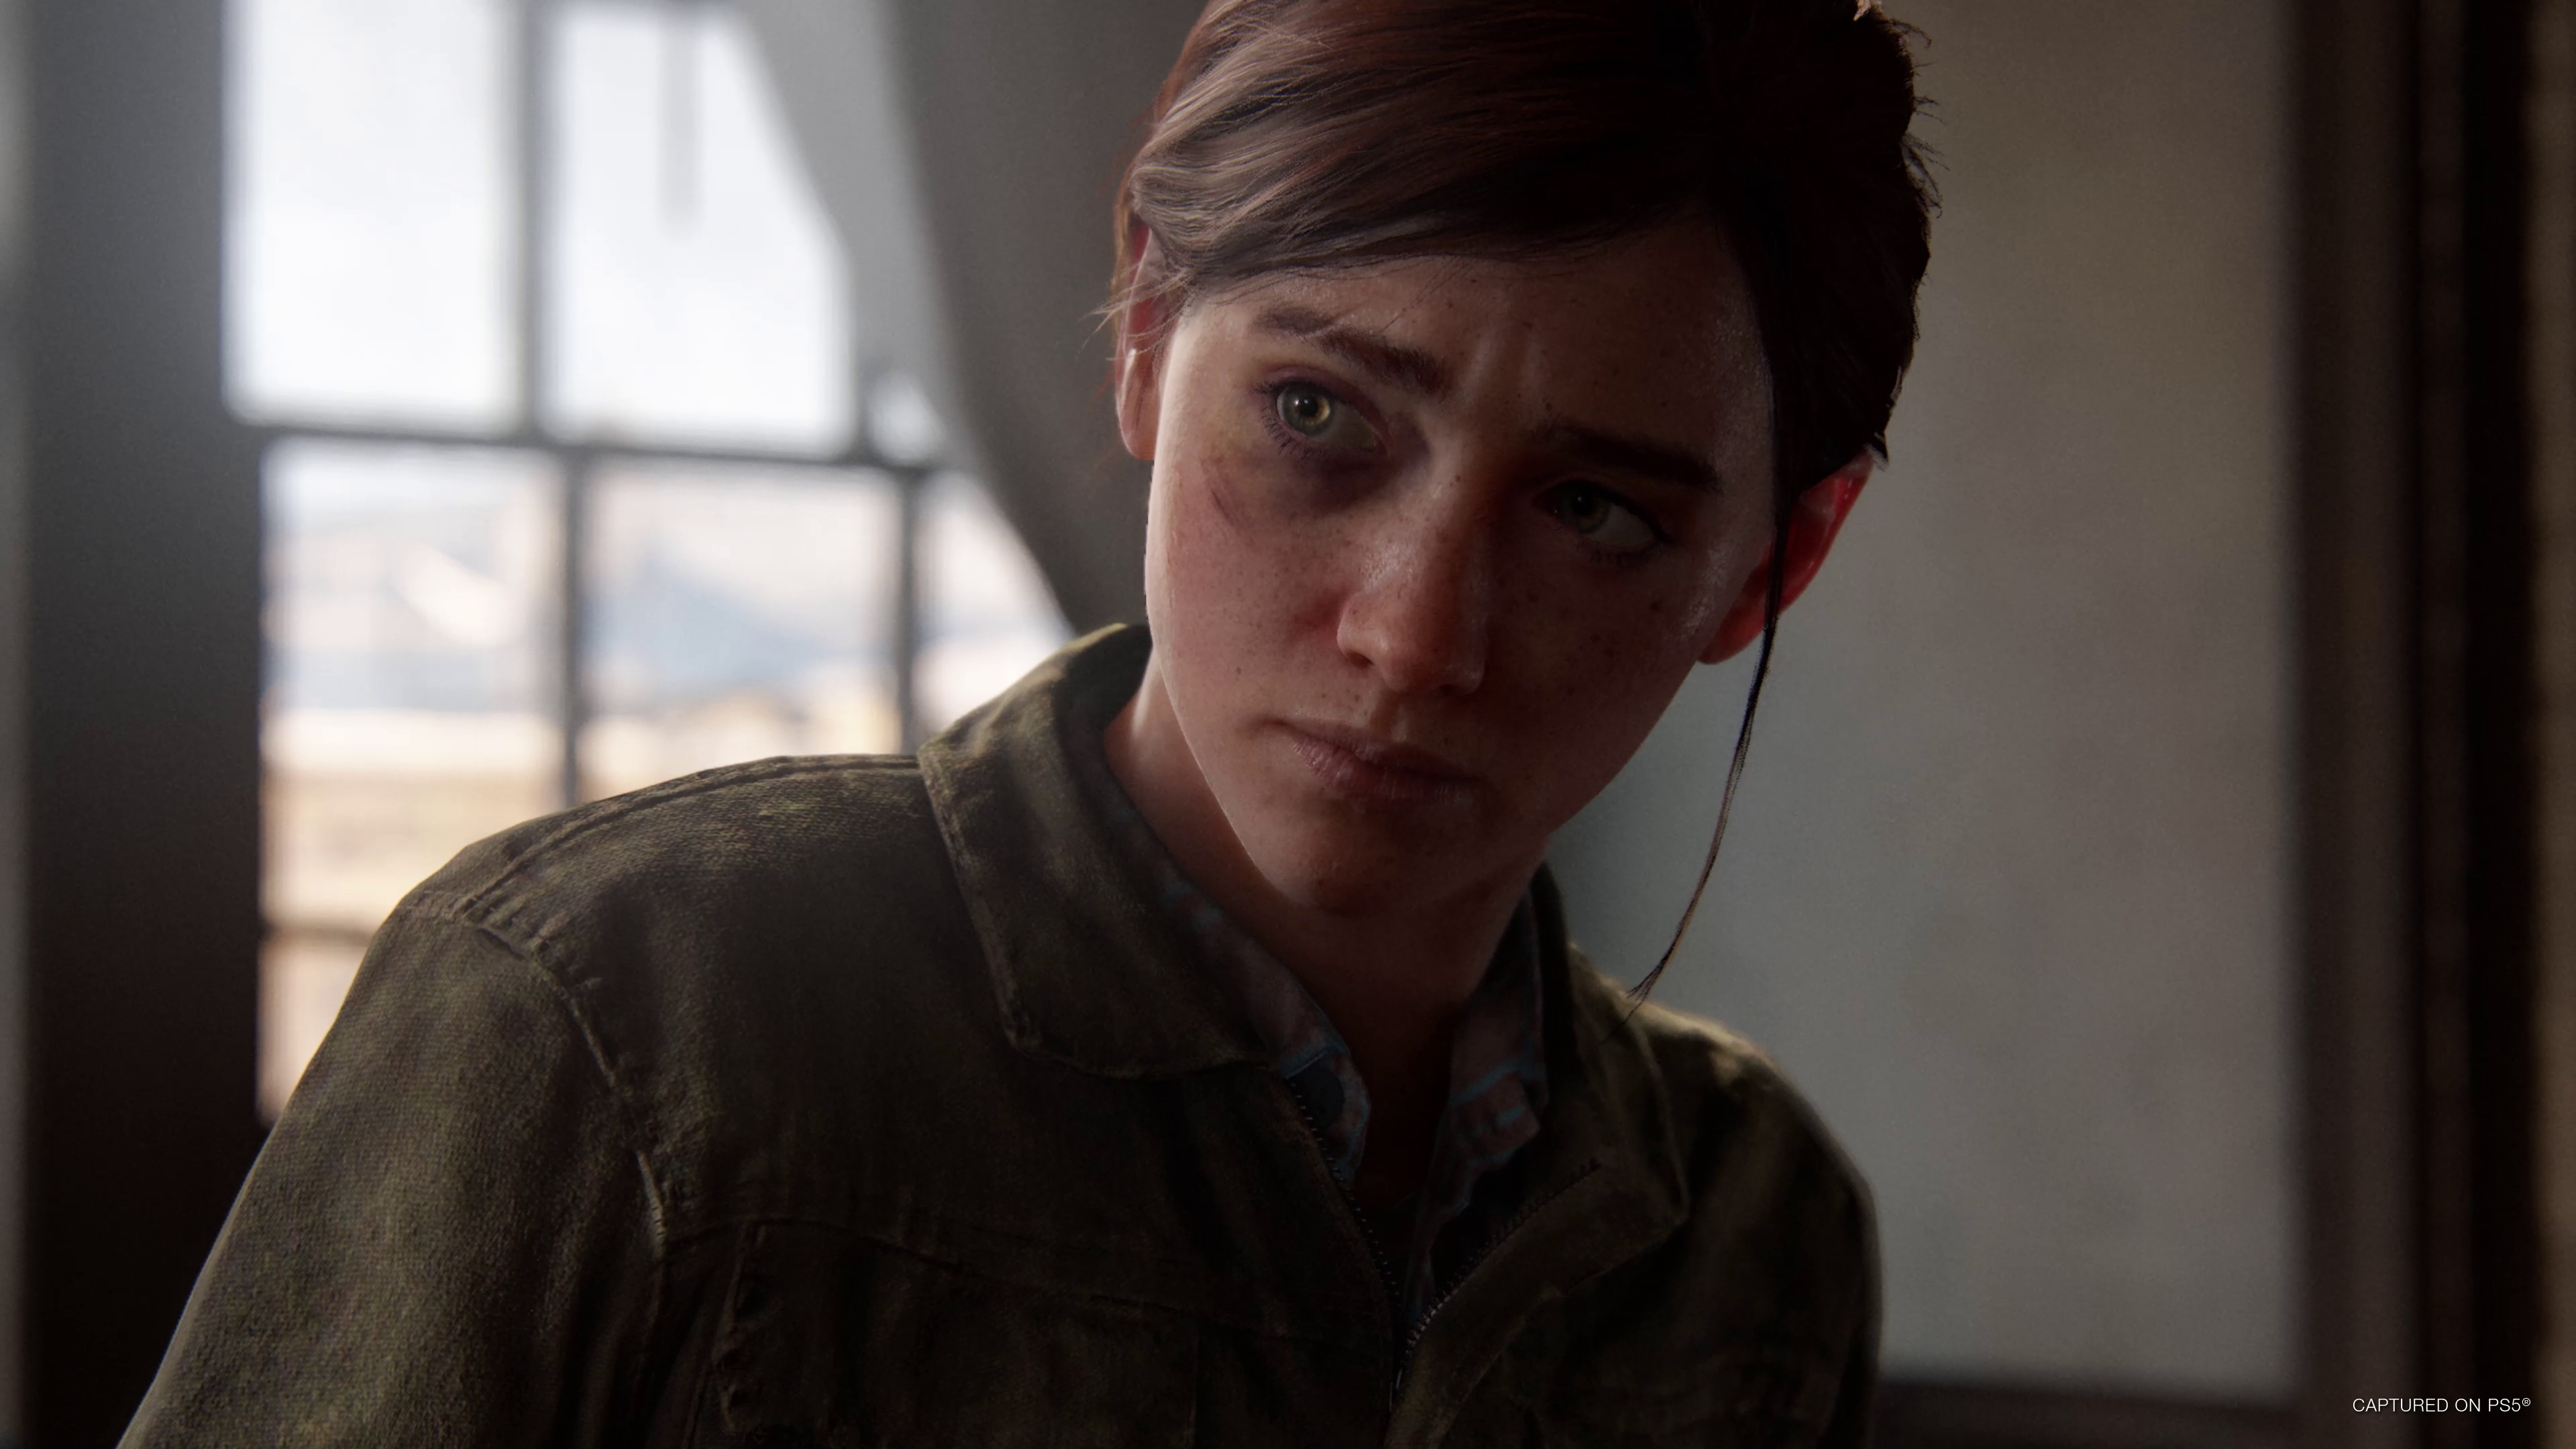 Ellie, a young woman with brown hair and a black eye, wearing an olive chambray zip-up shirt in The Last of Us Part 2 Remastered